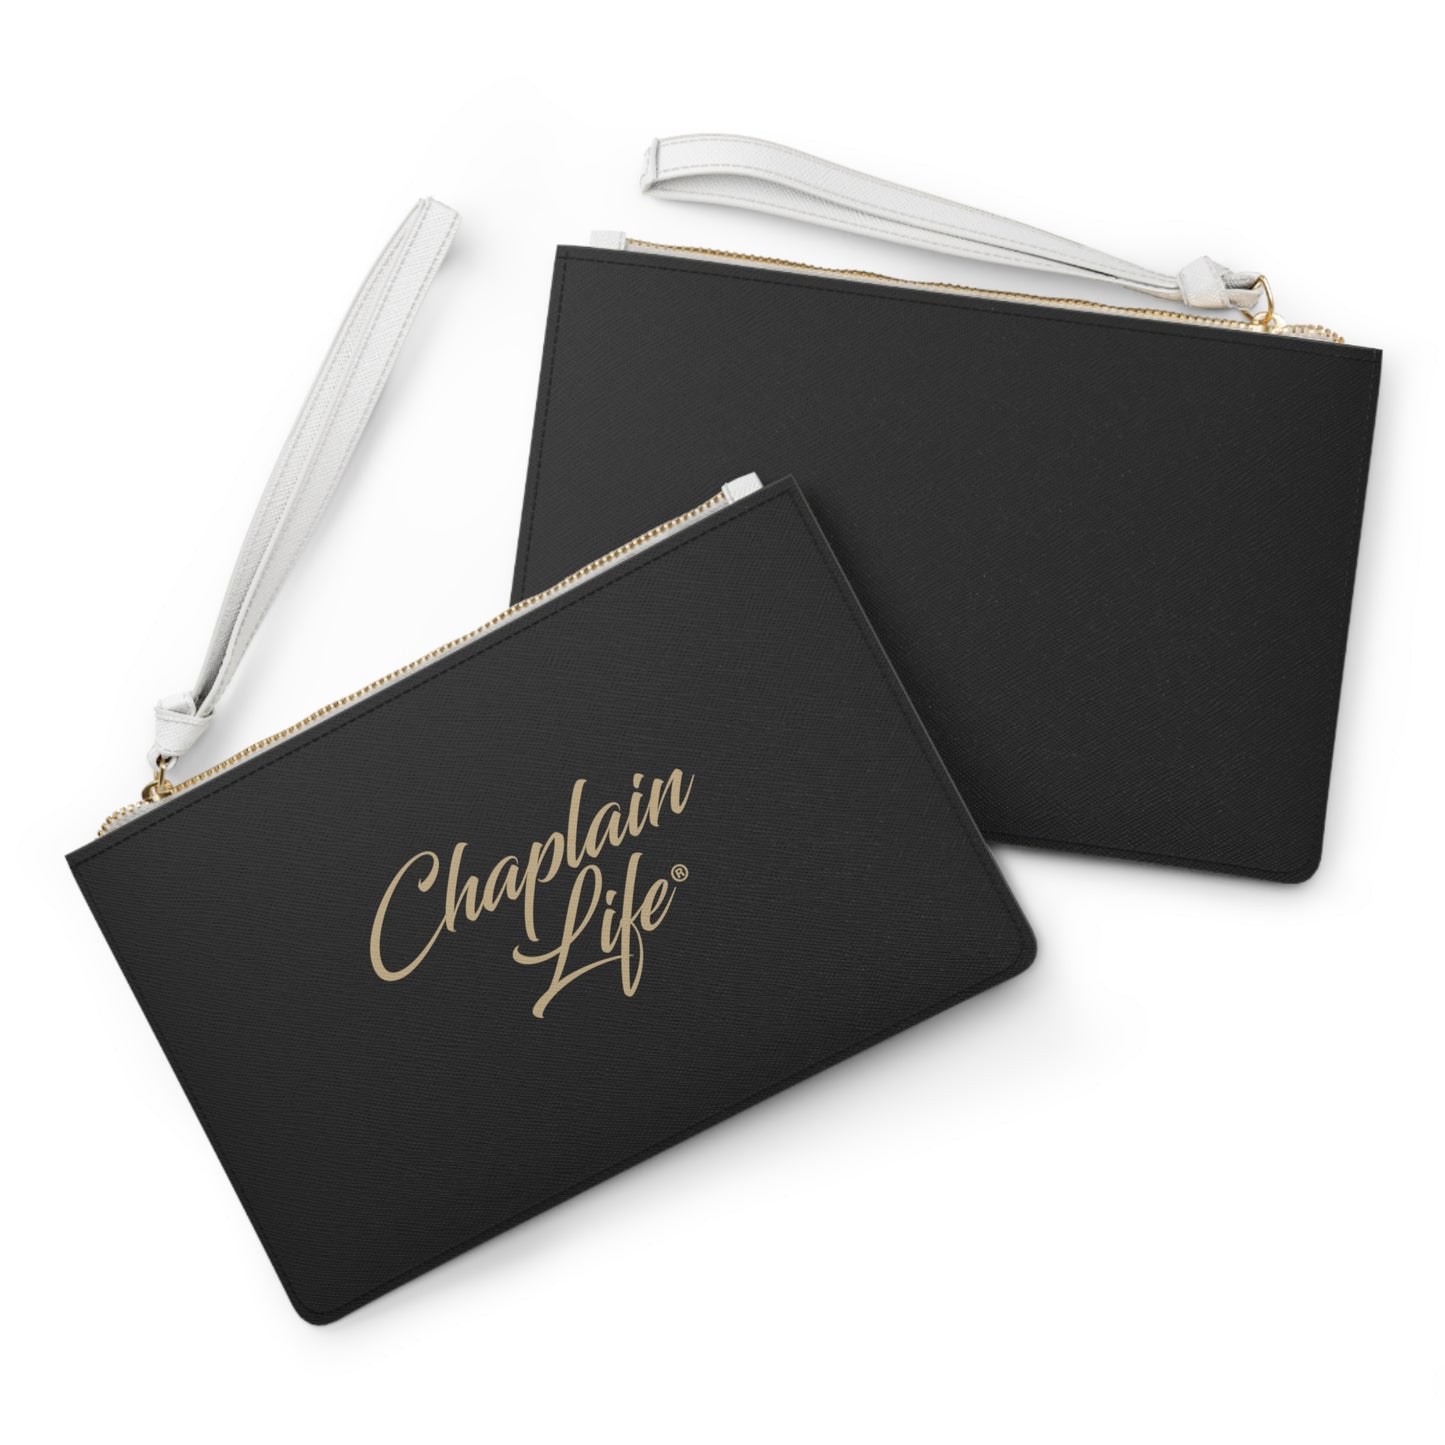 The Chaplain Clutch by Chaplain Life®